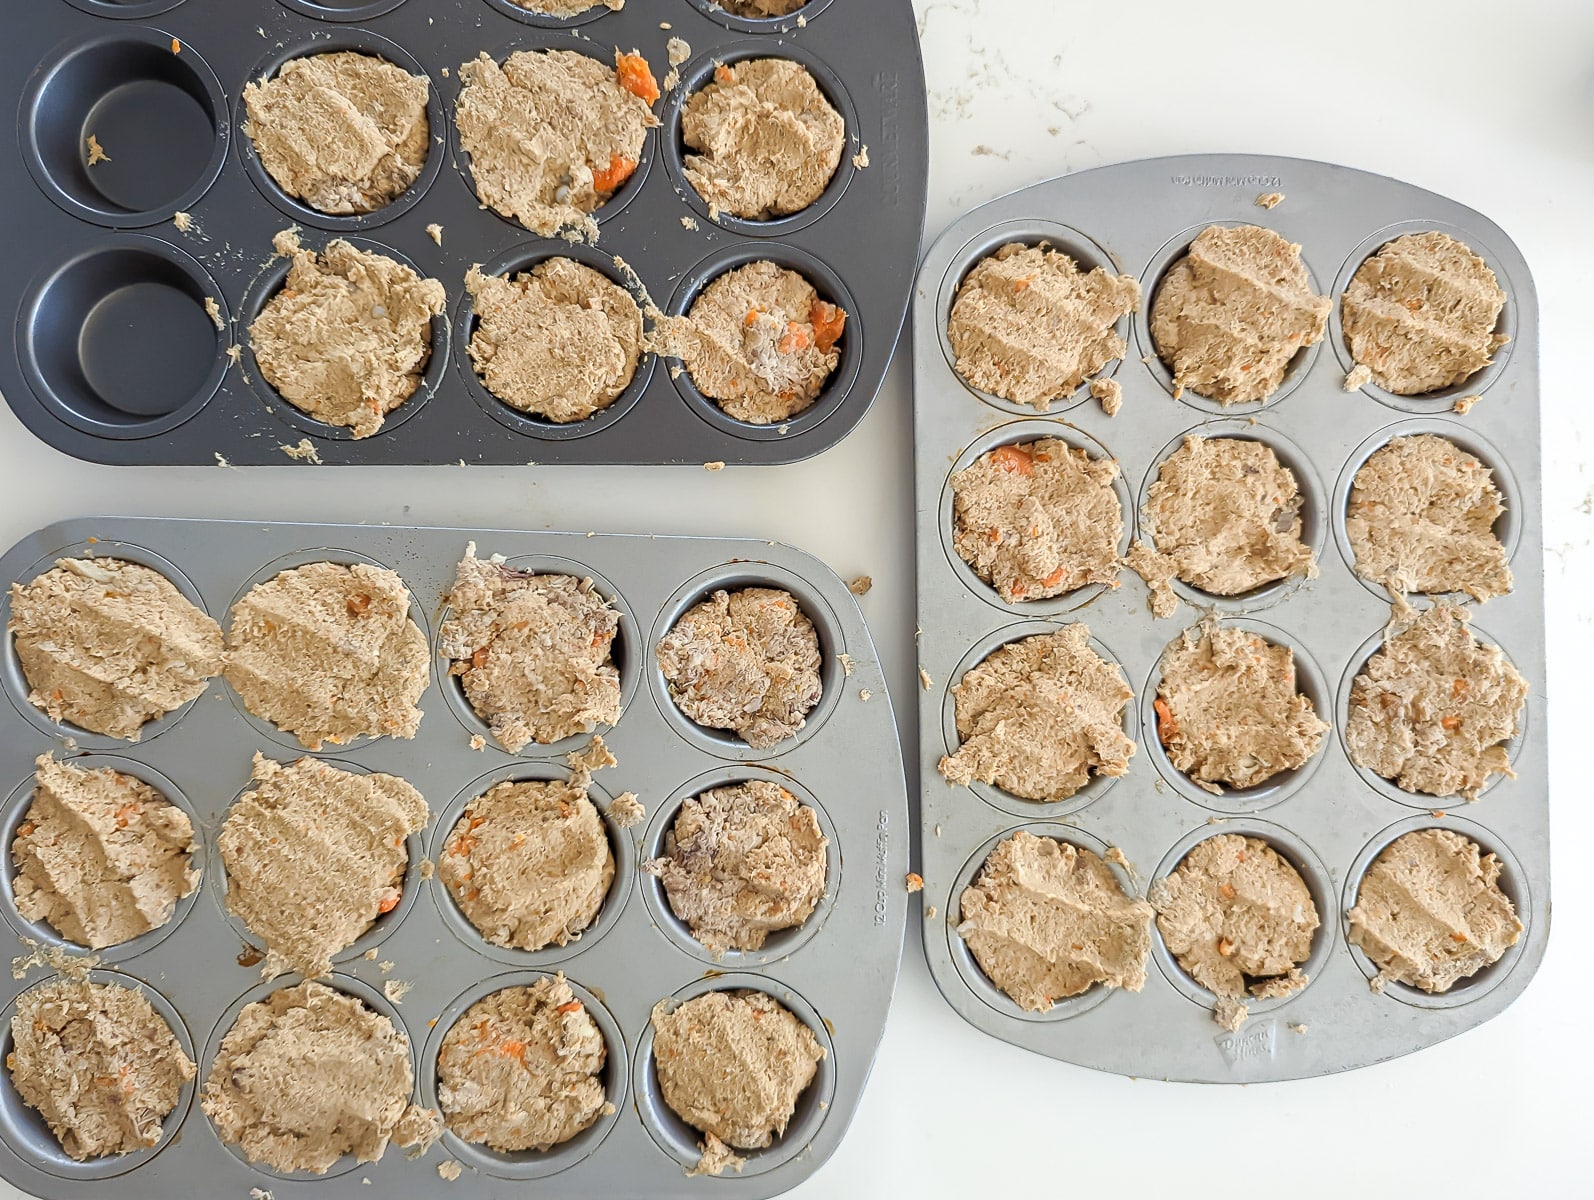 Meat in muffin tins for dogs.